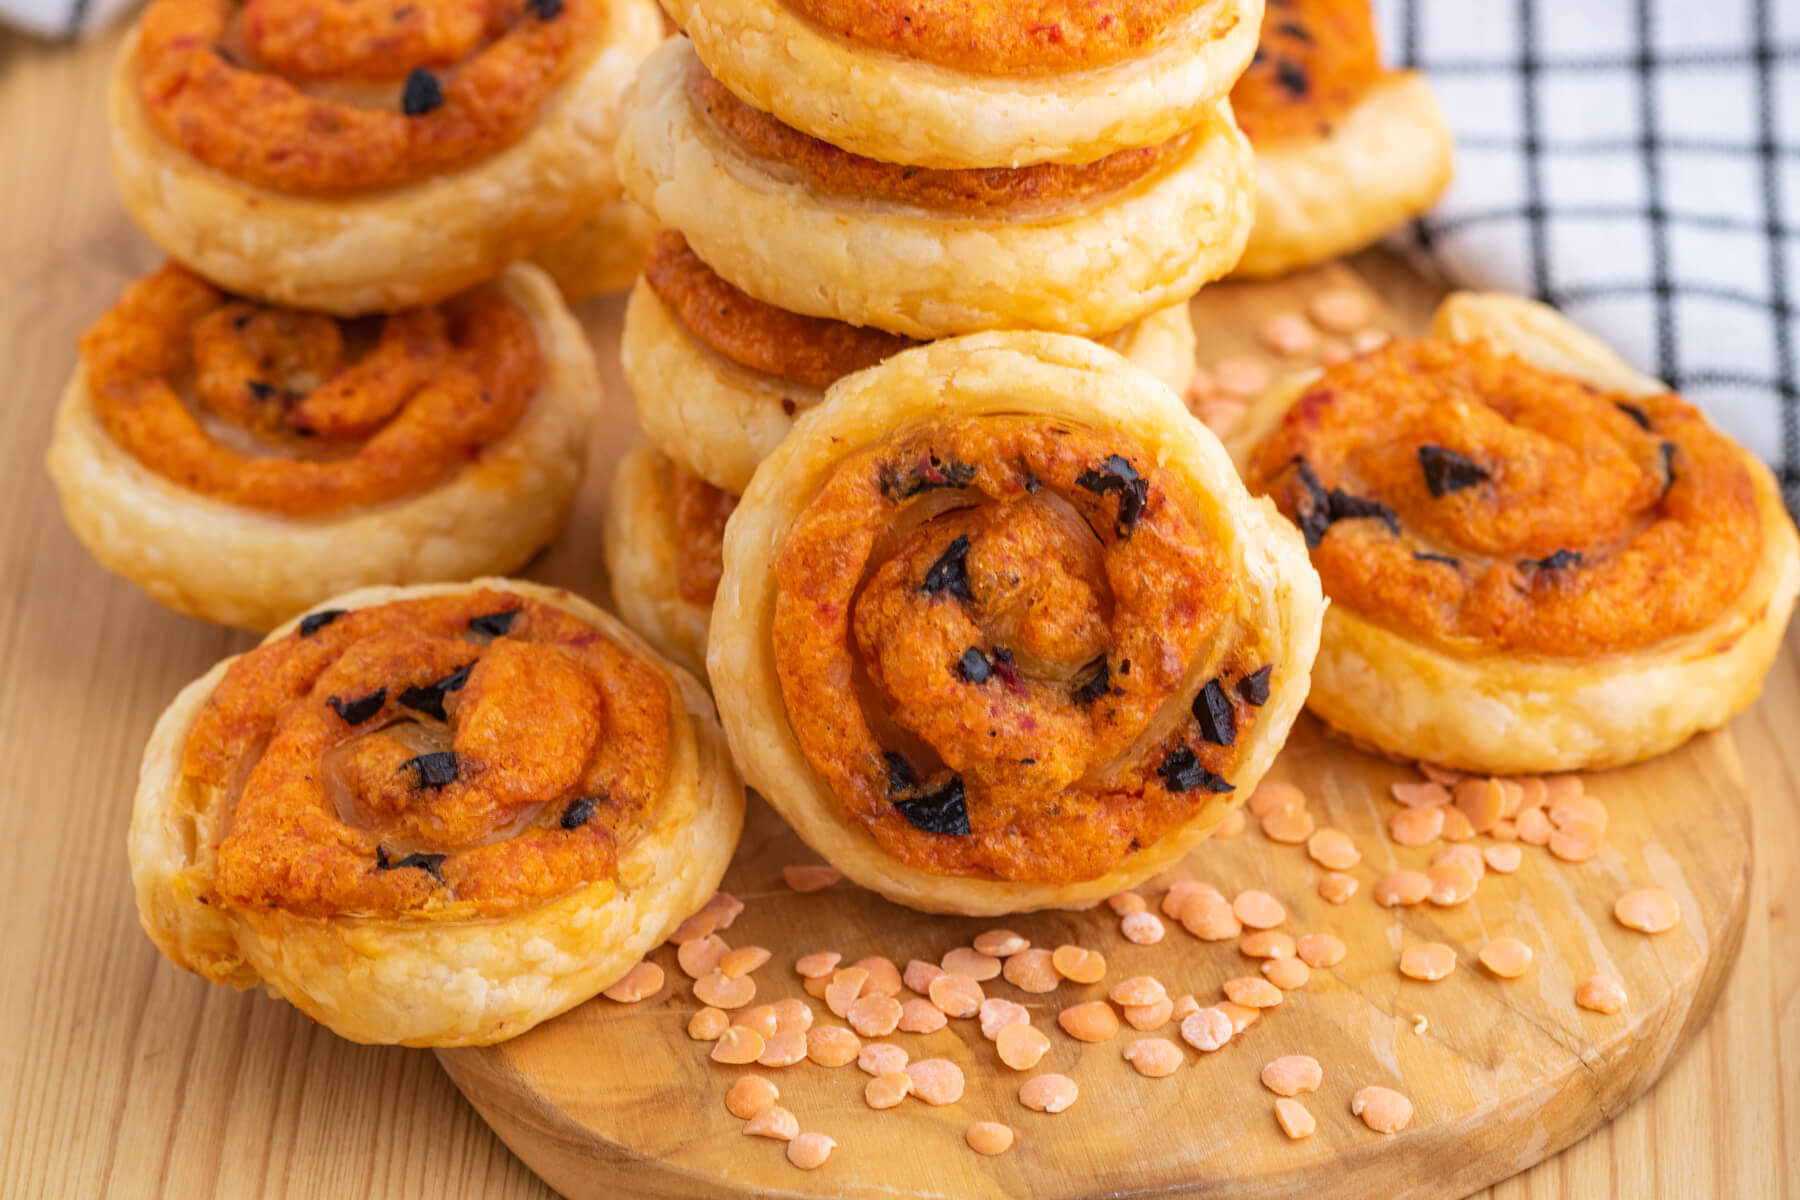 A pile of golden baked puff pastry pinwheels on a wooden board garnished with red lentils.